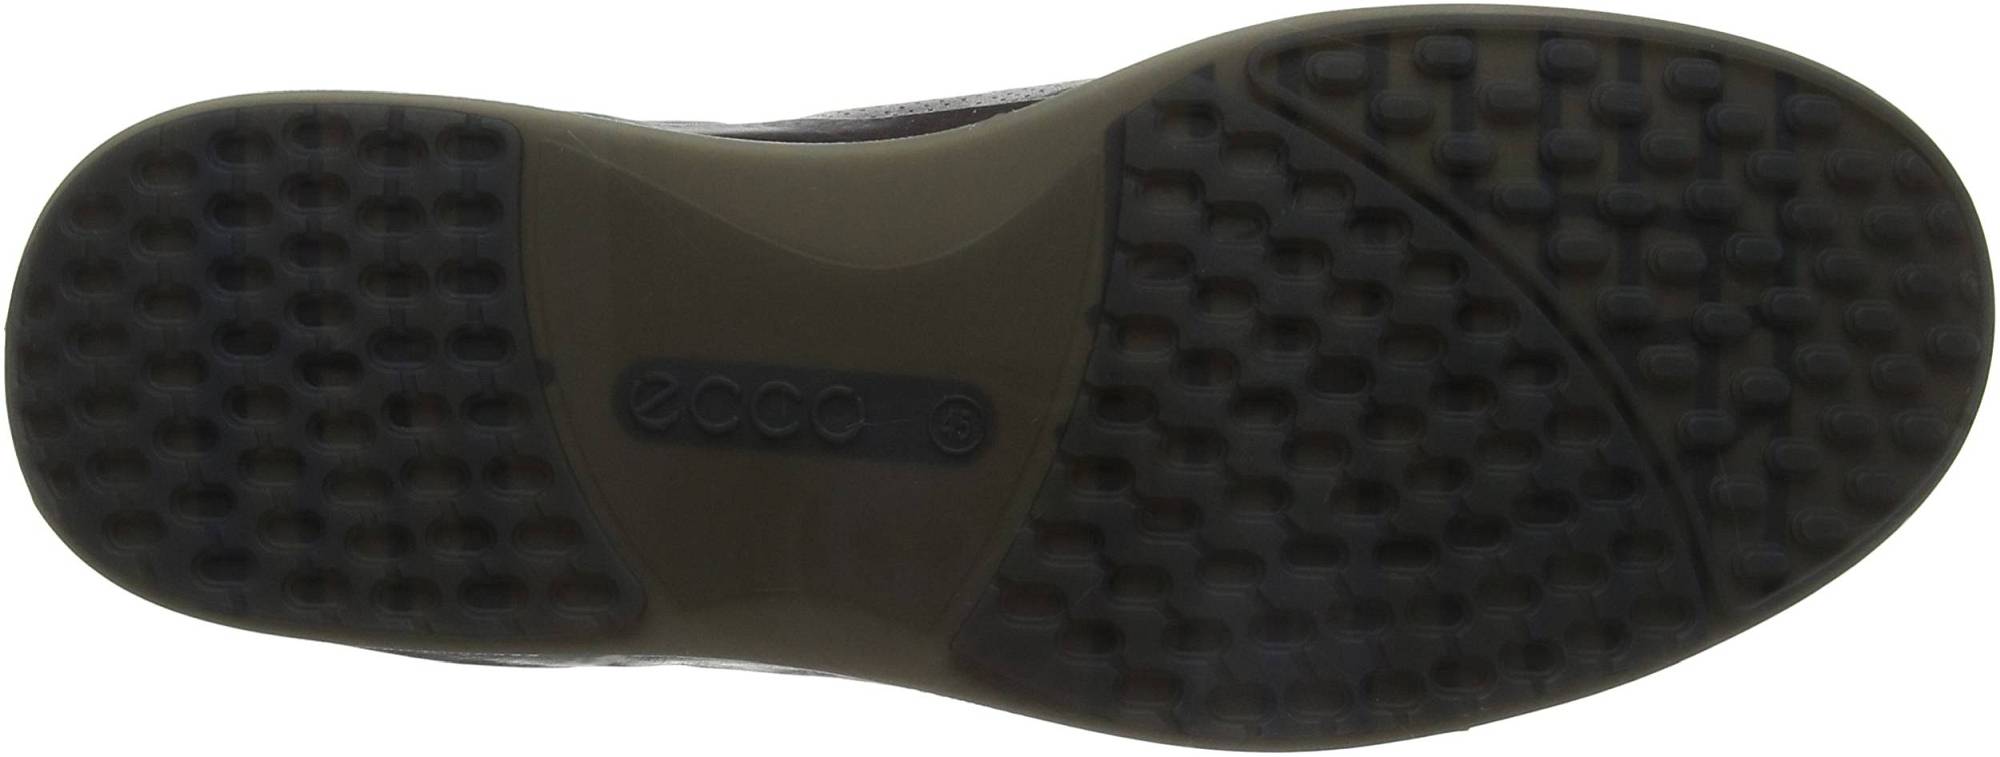 Ecco Cool GTX – Shoes Reviews & Reasons To Buy